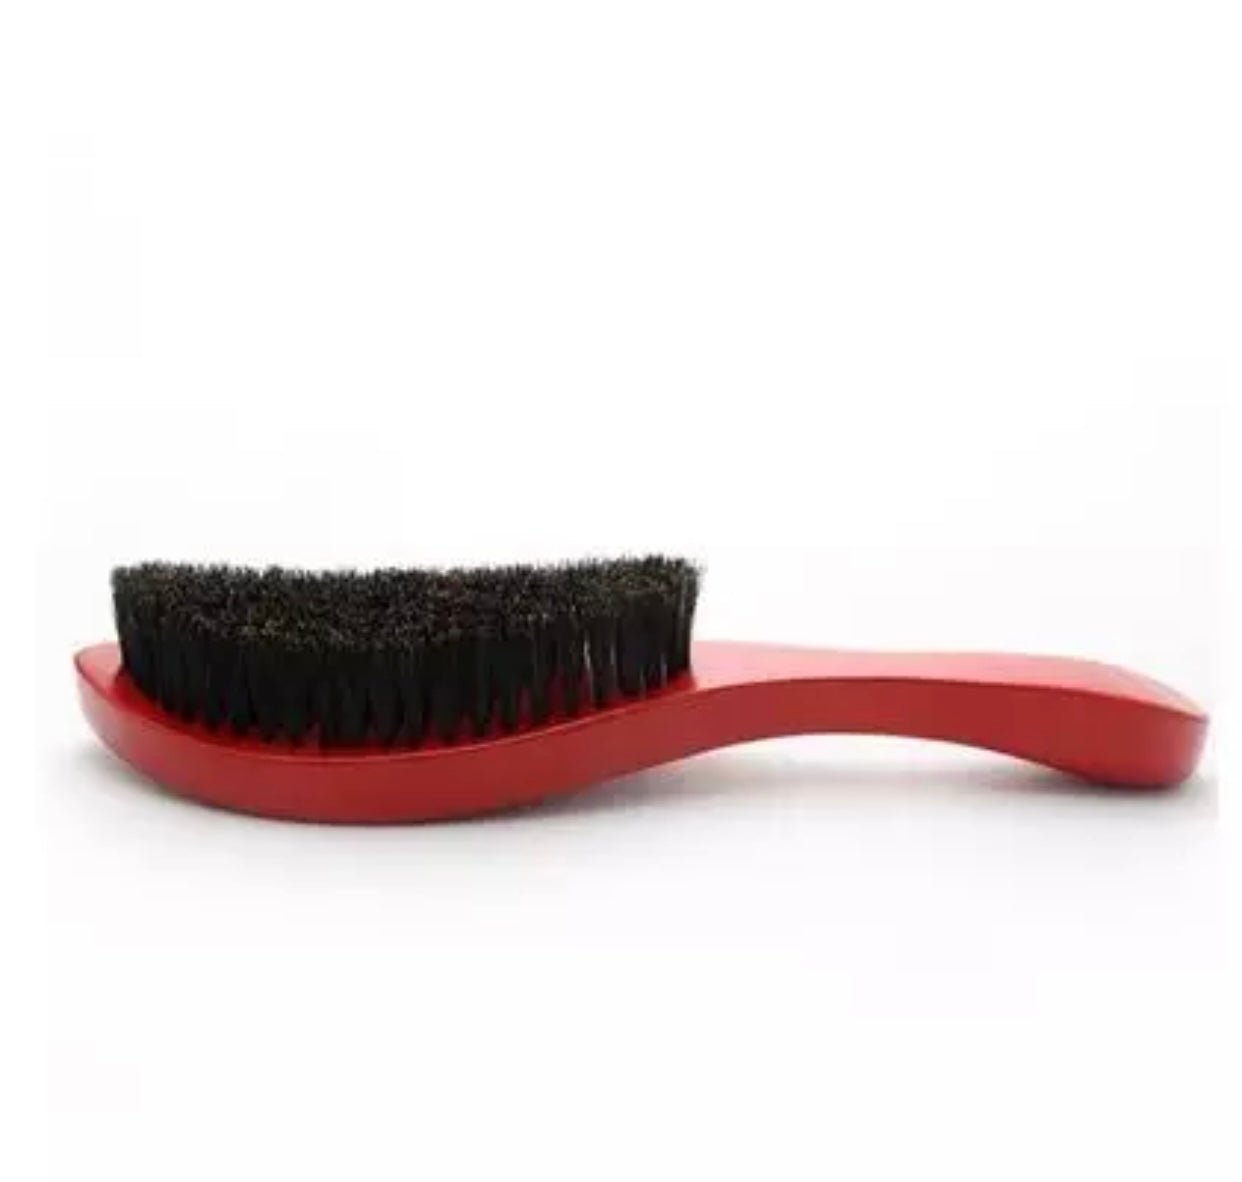 Curved Wave Brush - The Barbher Brand